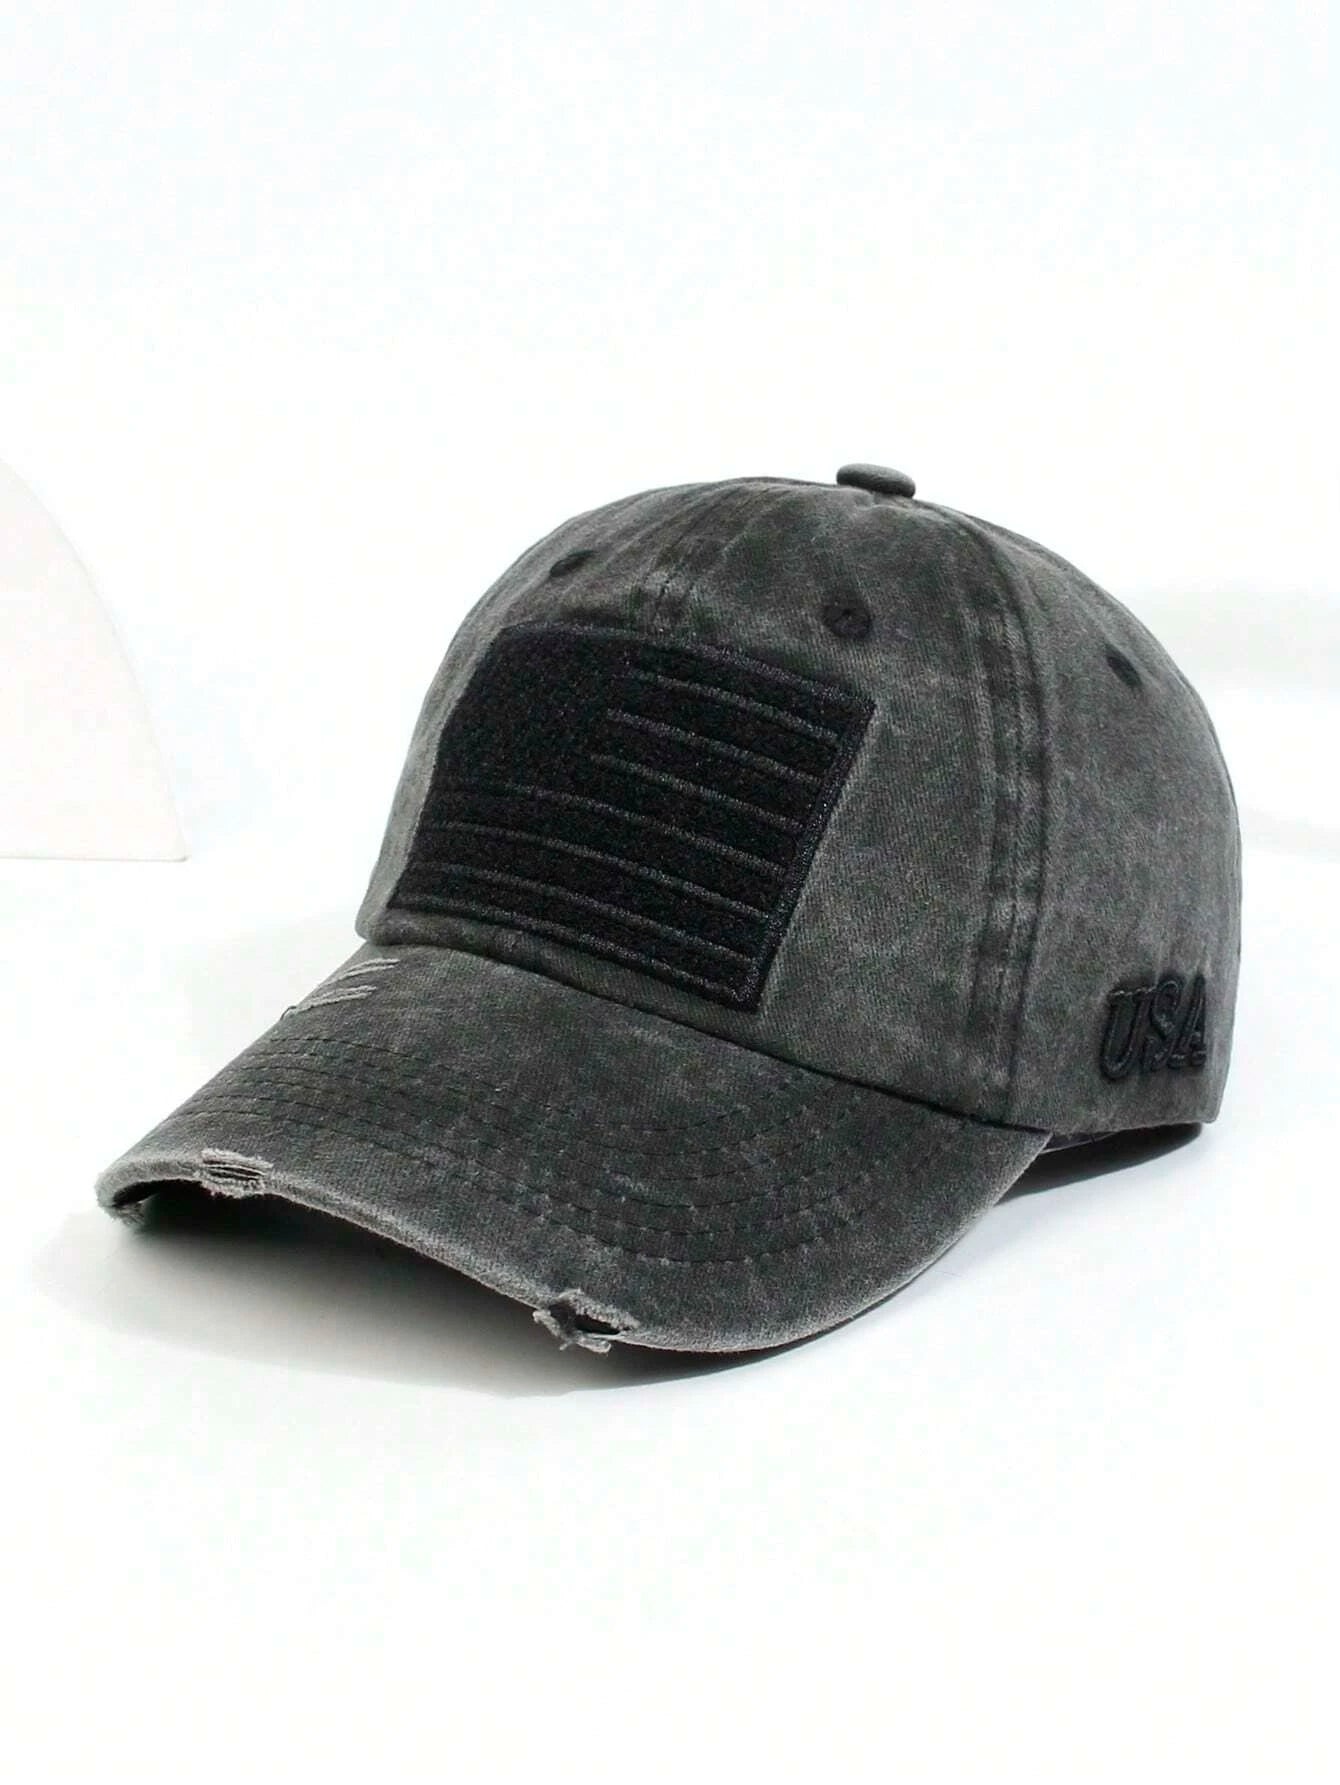 1pc Men American Flag & Letter Embroidered Ripped Adjustable Casual Baseball Cap For Outdoor